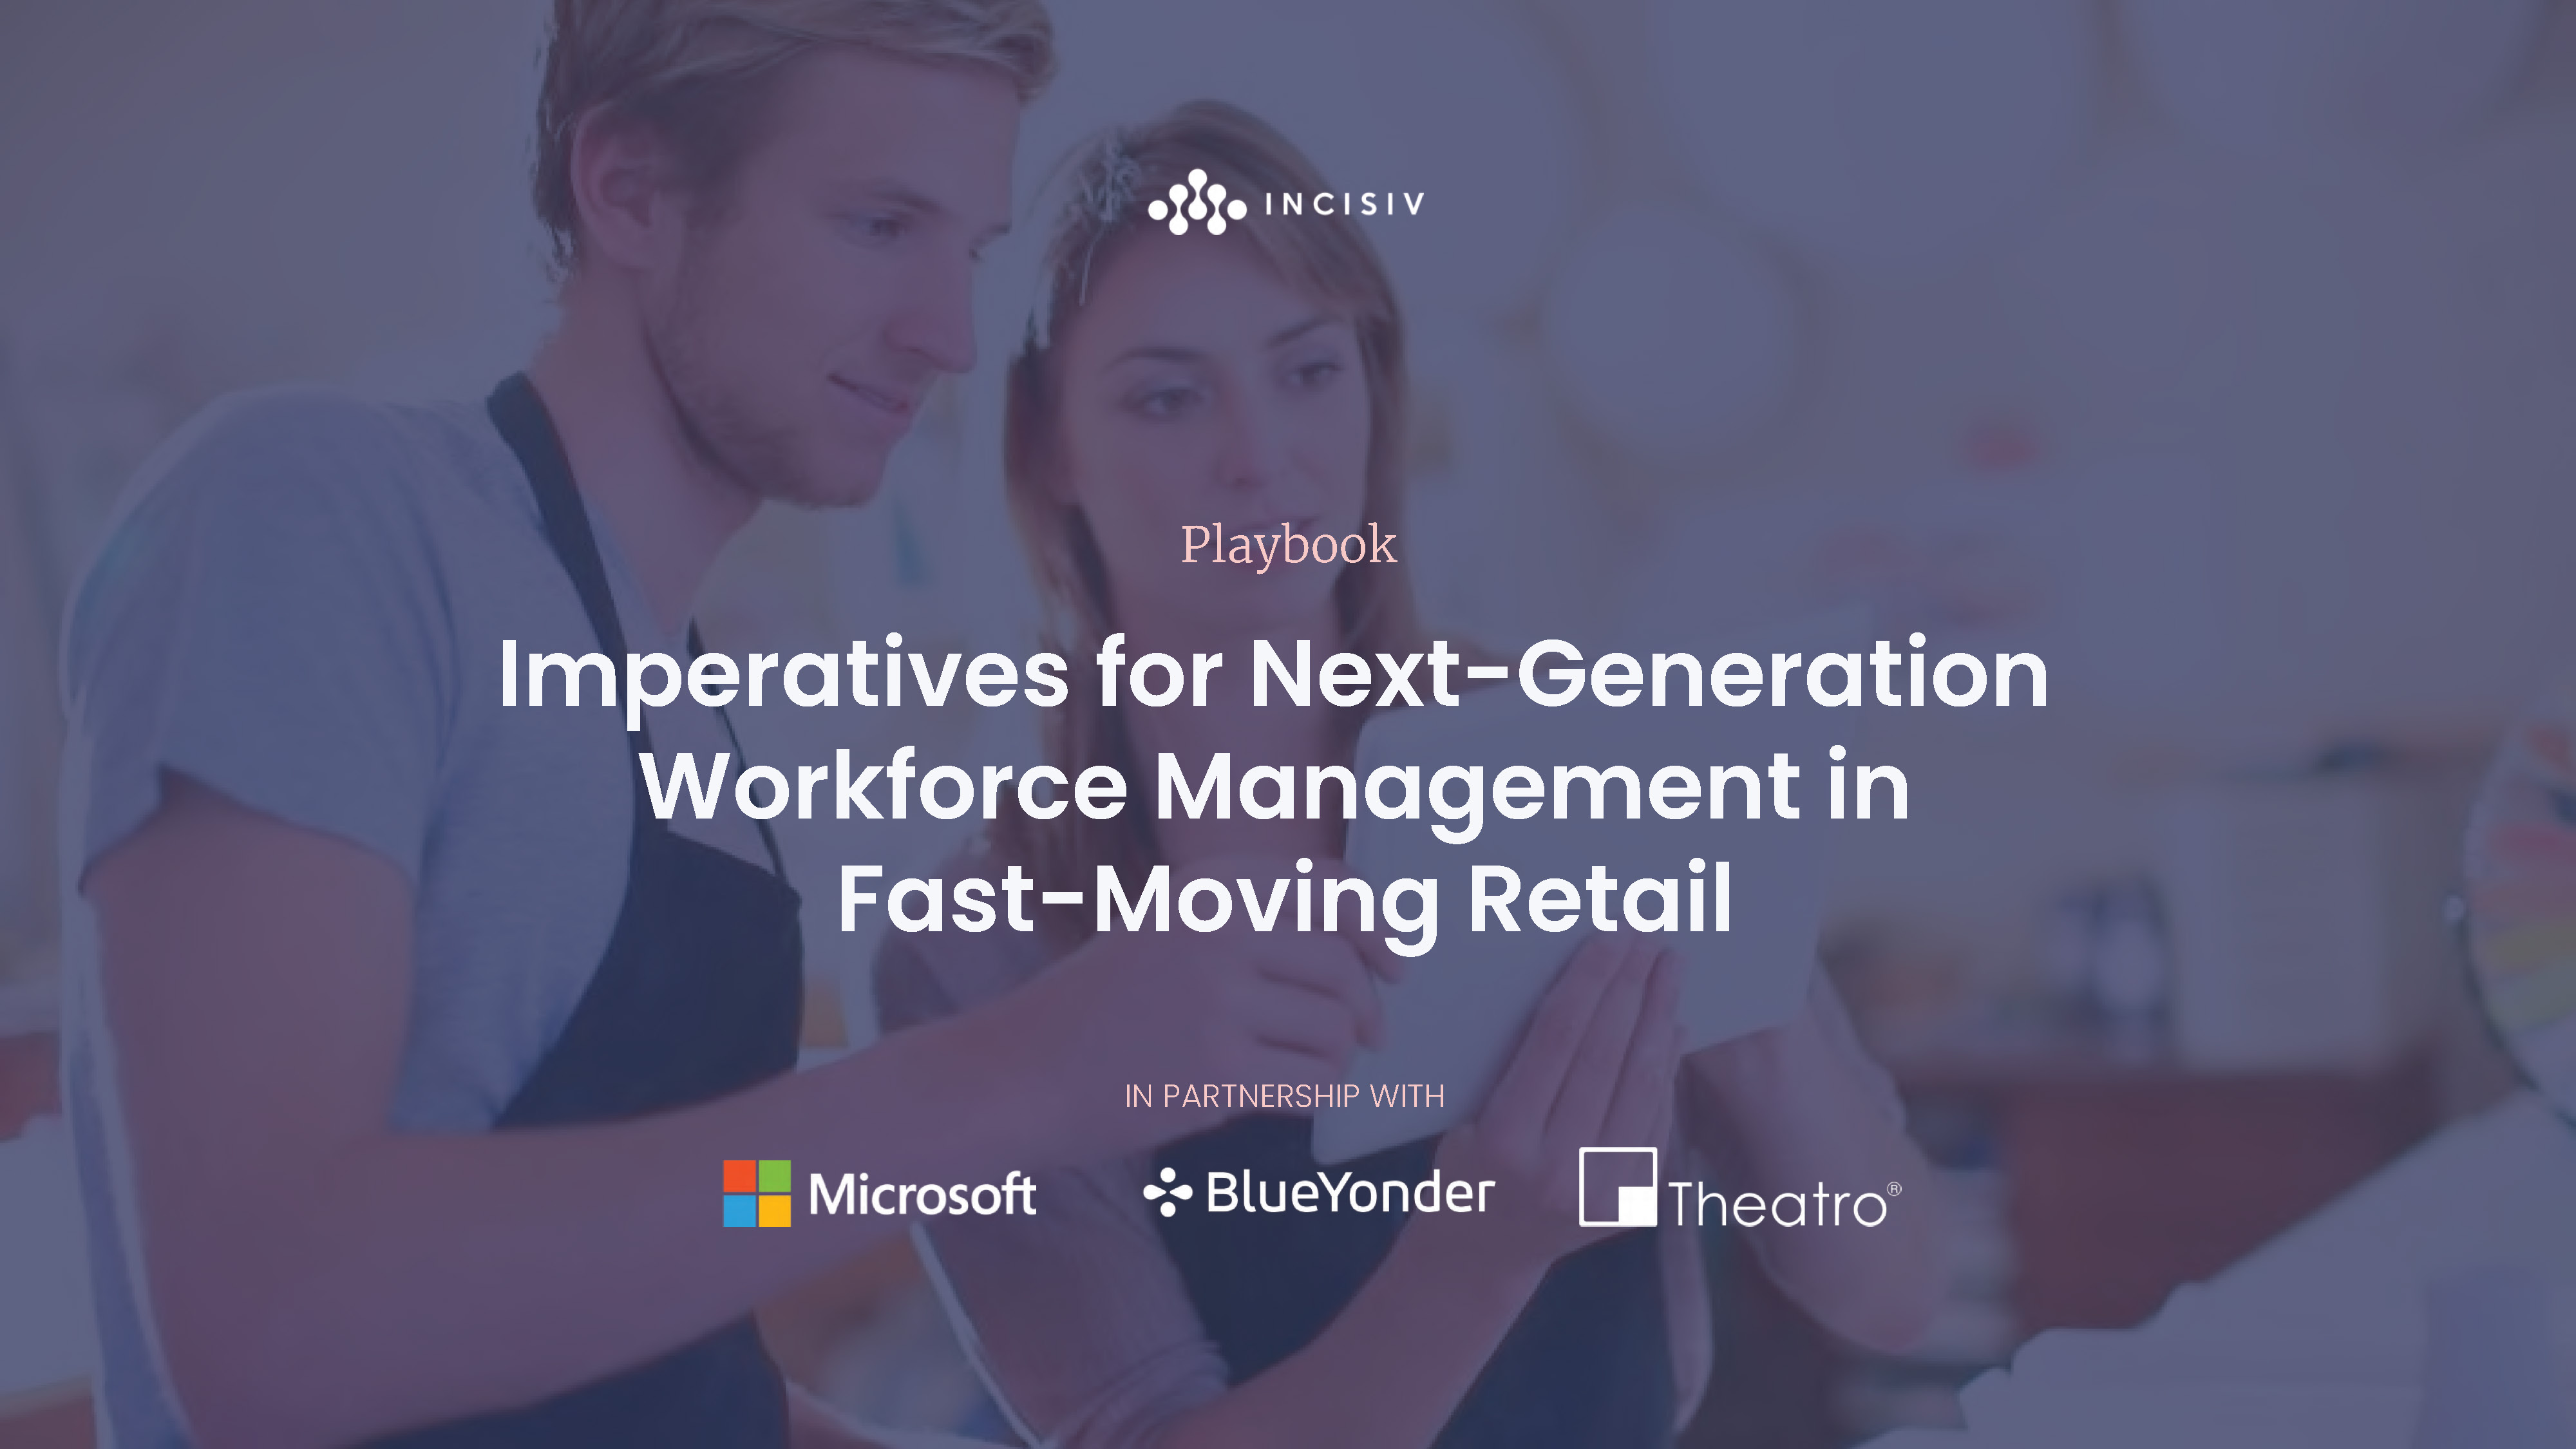 Imperatives for Next-Generation Workforce Management in Fast-Moving Retail